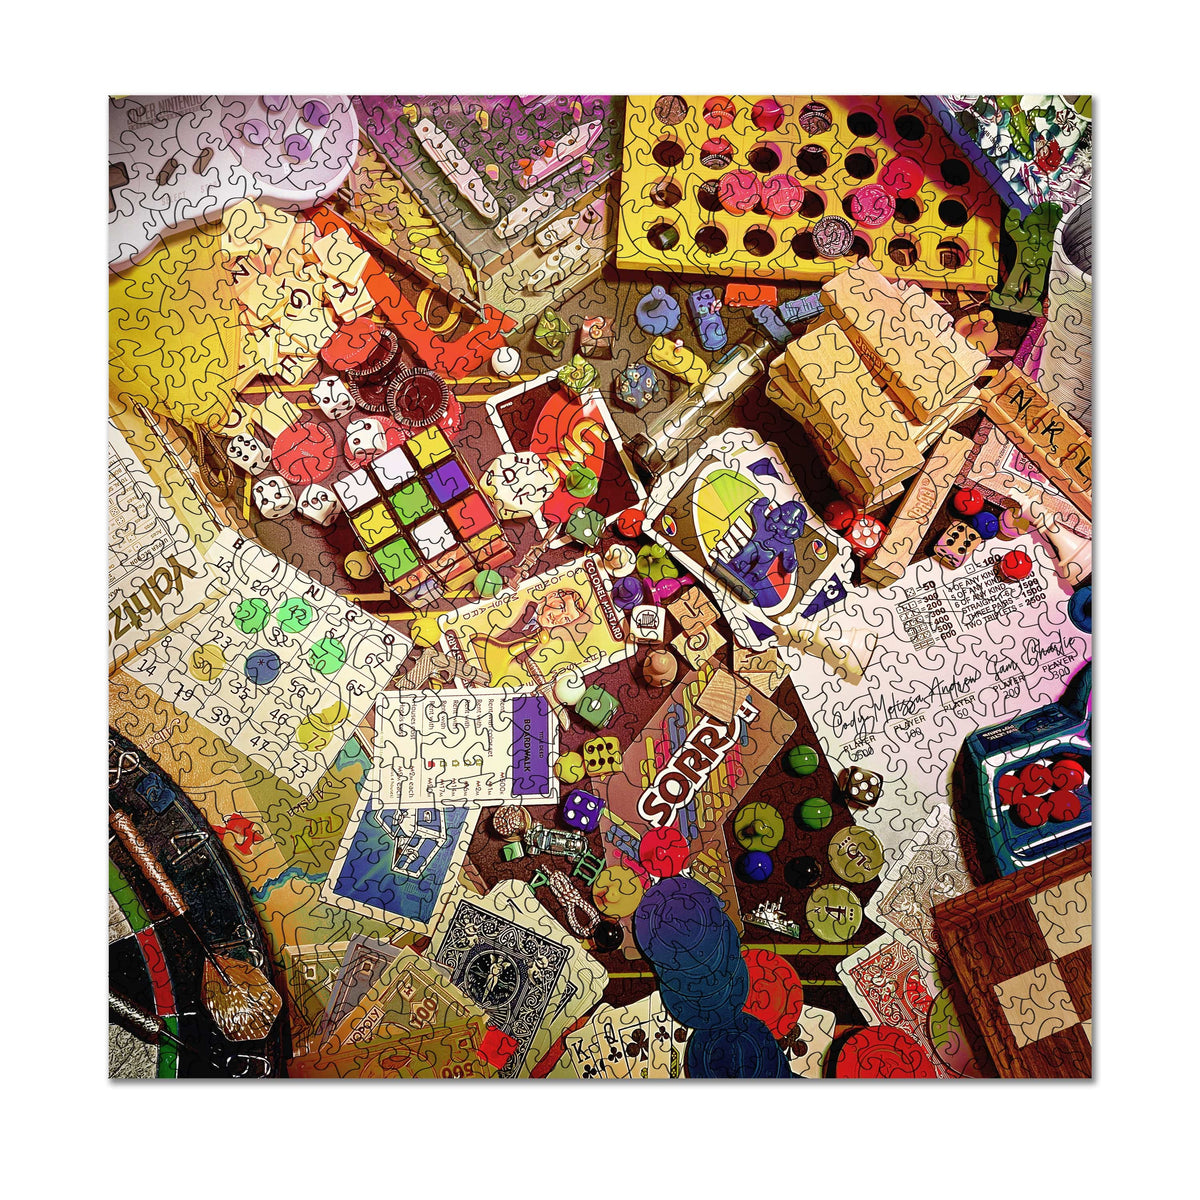 Classic Games - Personalized Wooden Jigsaw Puzzle - Whimsical Pieces